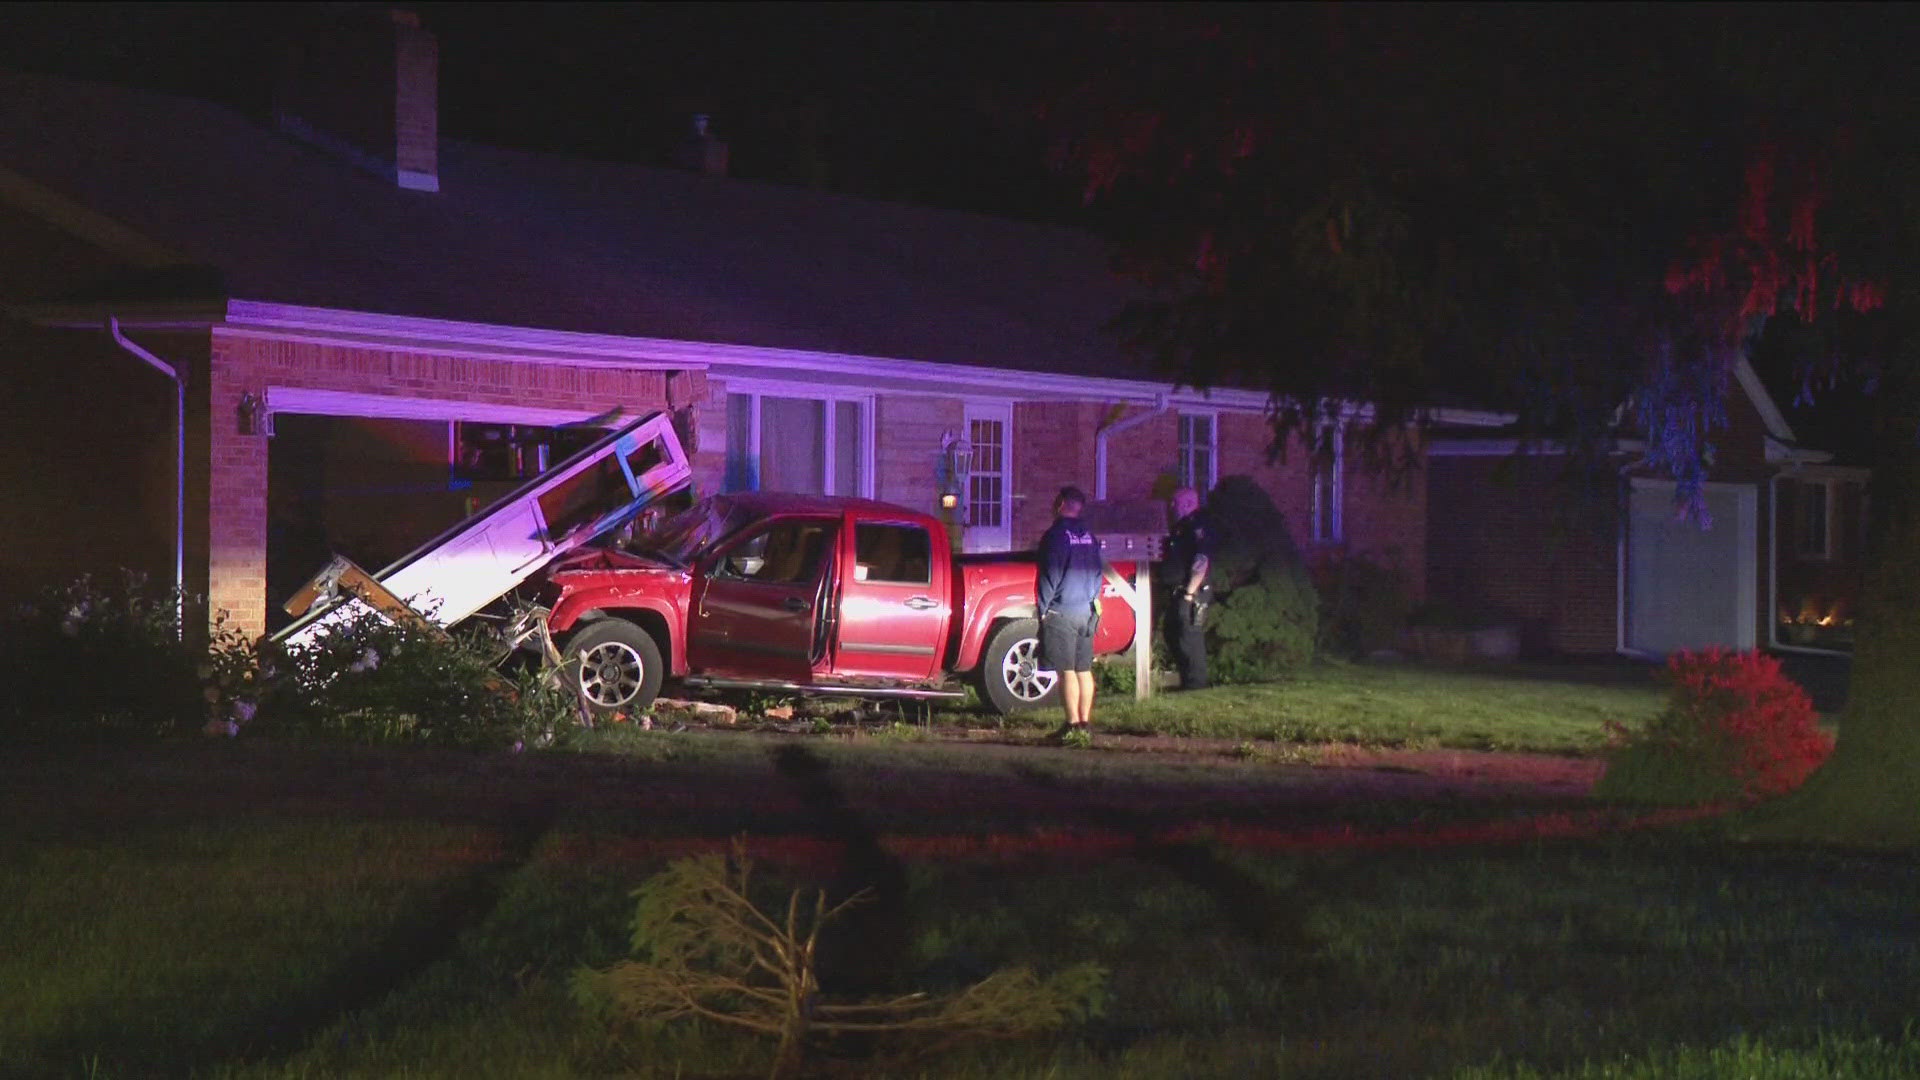 The crash happened on Clover Lane off of Laskey Road around 2:20 a.m.